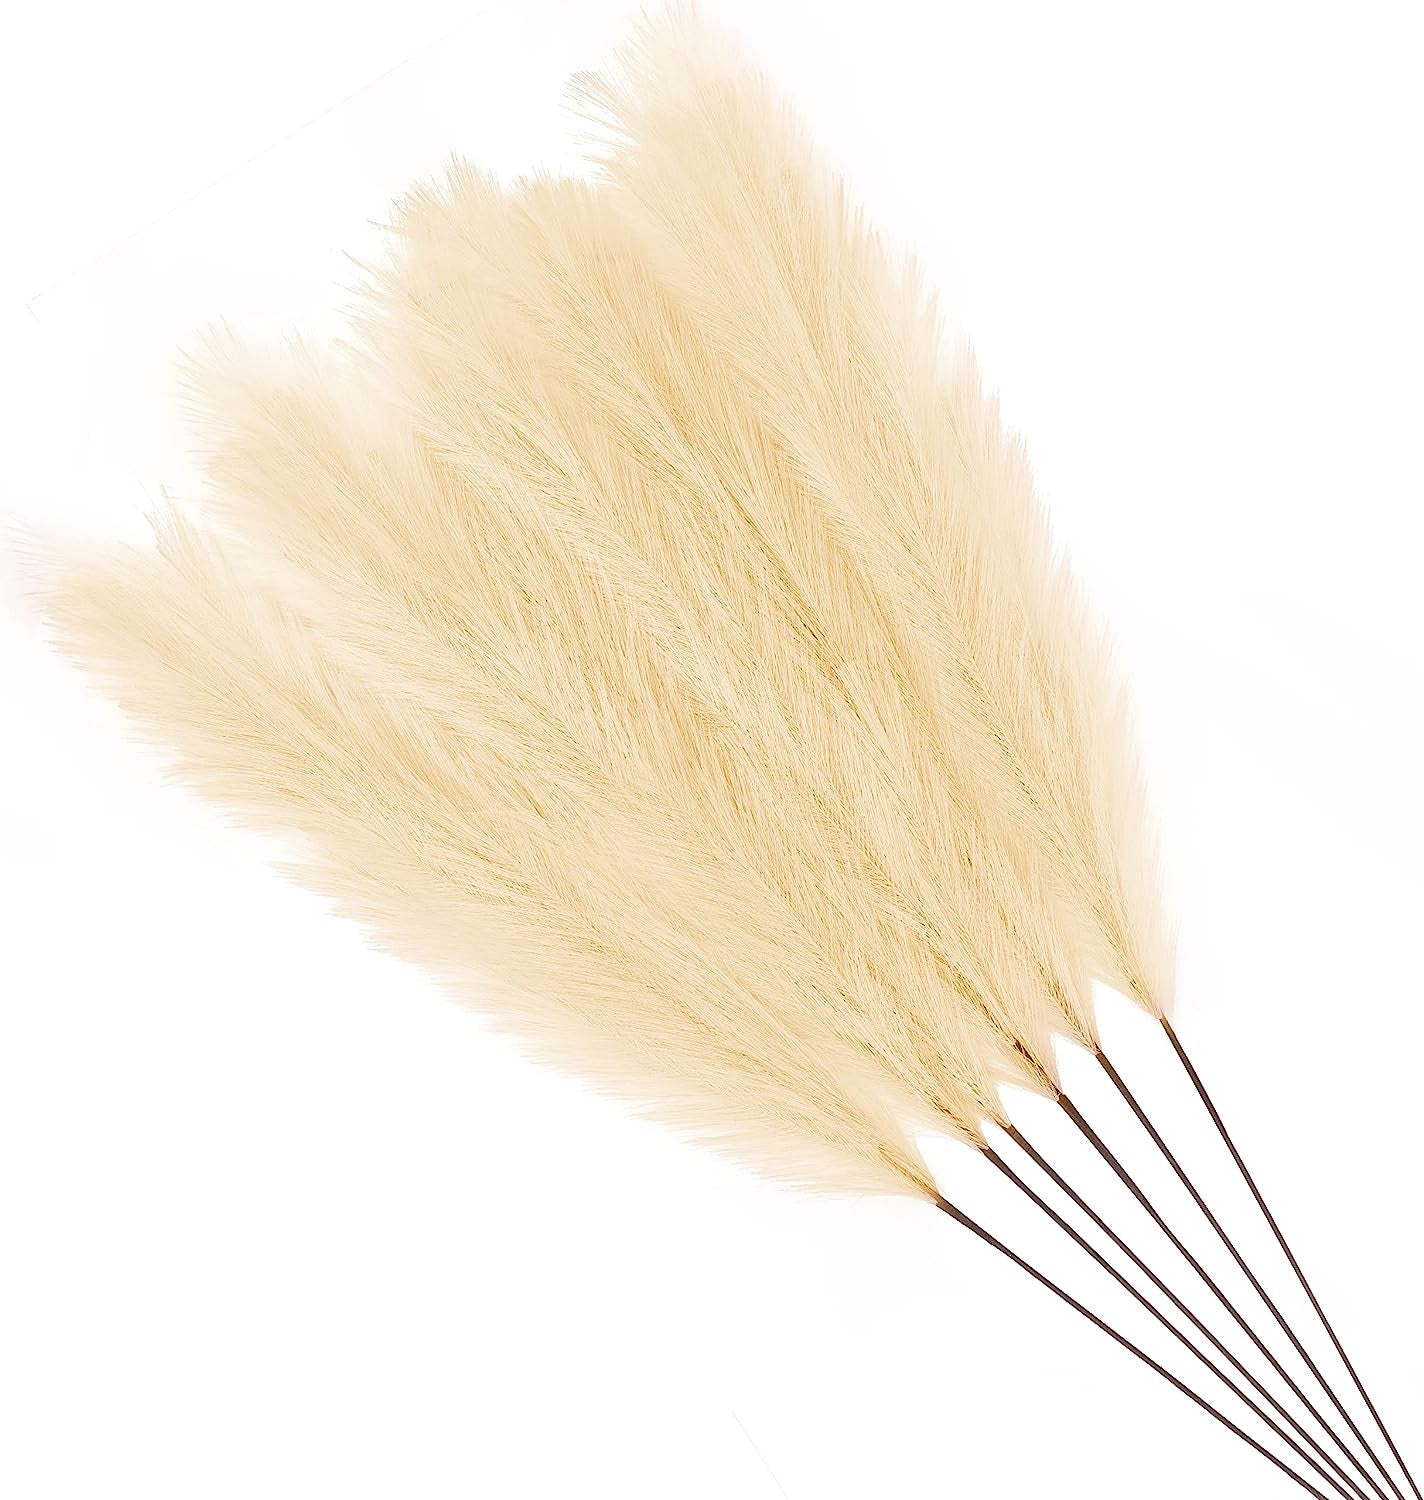 6 Stems Faux Pampas Grass Tall Extra Fluffy 48" (4Ft) - Home Decor Fake Artificial Large Plant for Flower Arrangements Weddings and Home Decor – Modern and Luxury Design Decorations (Beige)